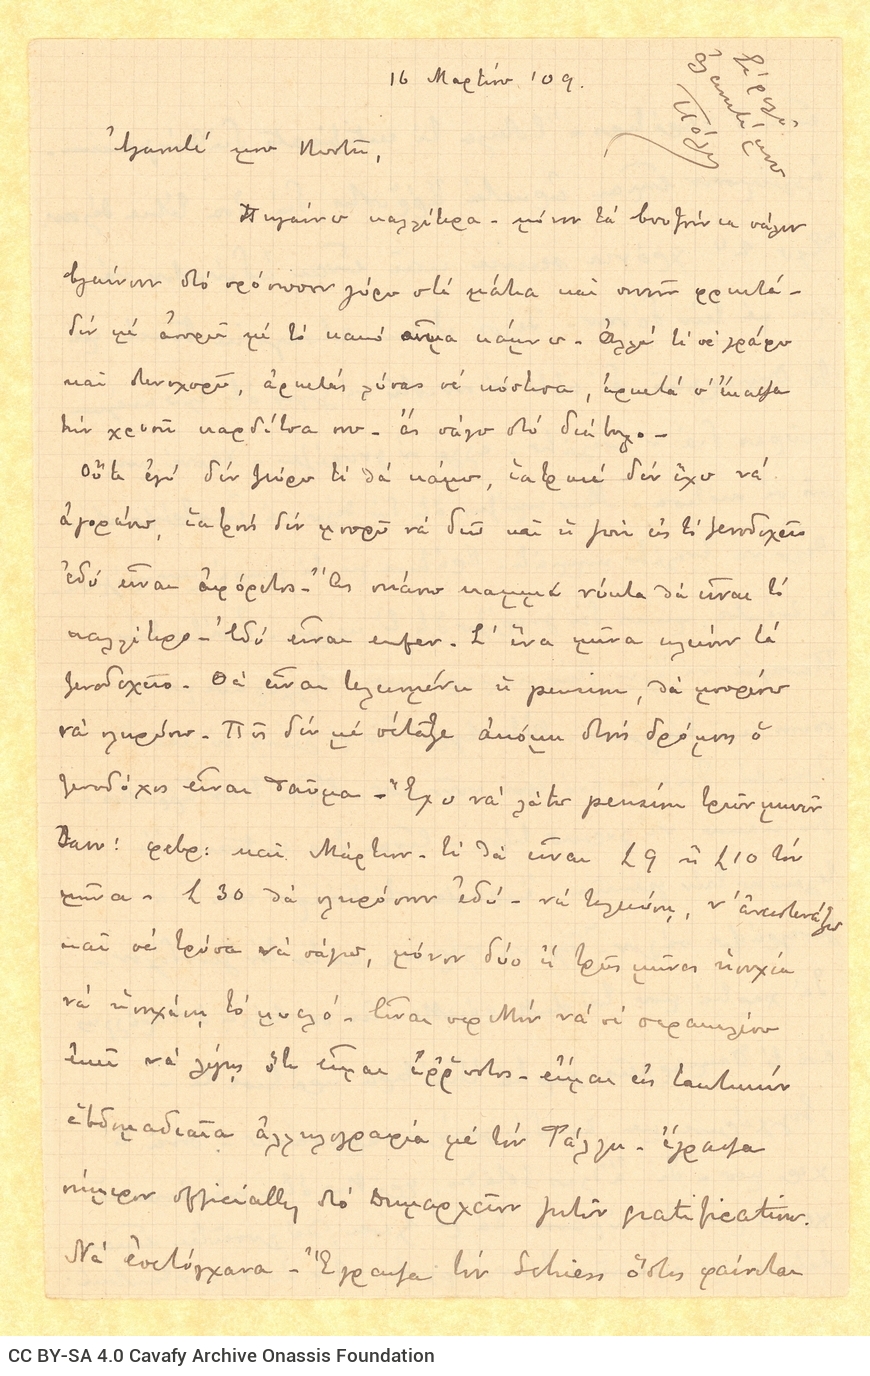 Handwritten letter by Paul to C. P. Cavafy on both sides of a sheet. Comments on his health and his personal debts. Reference